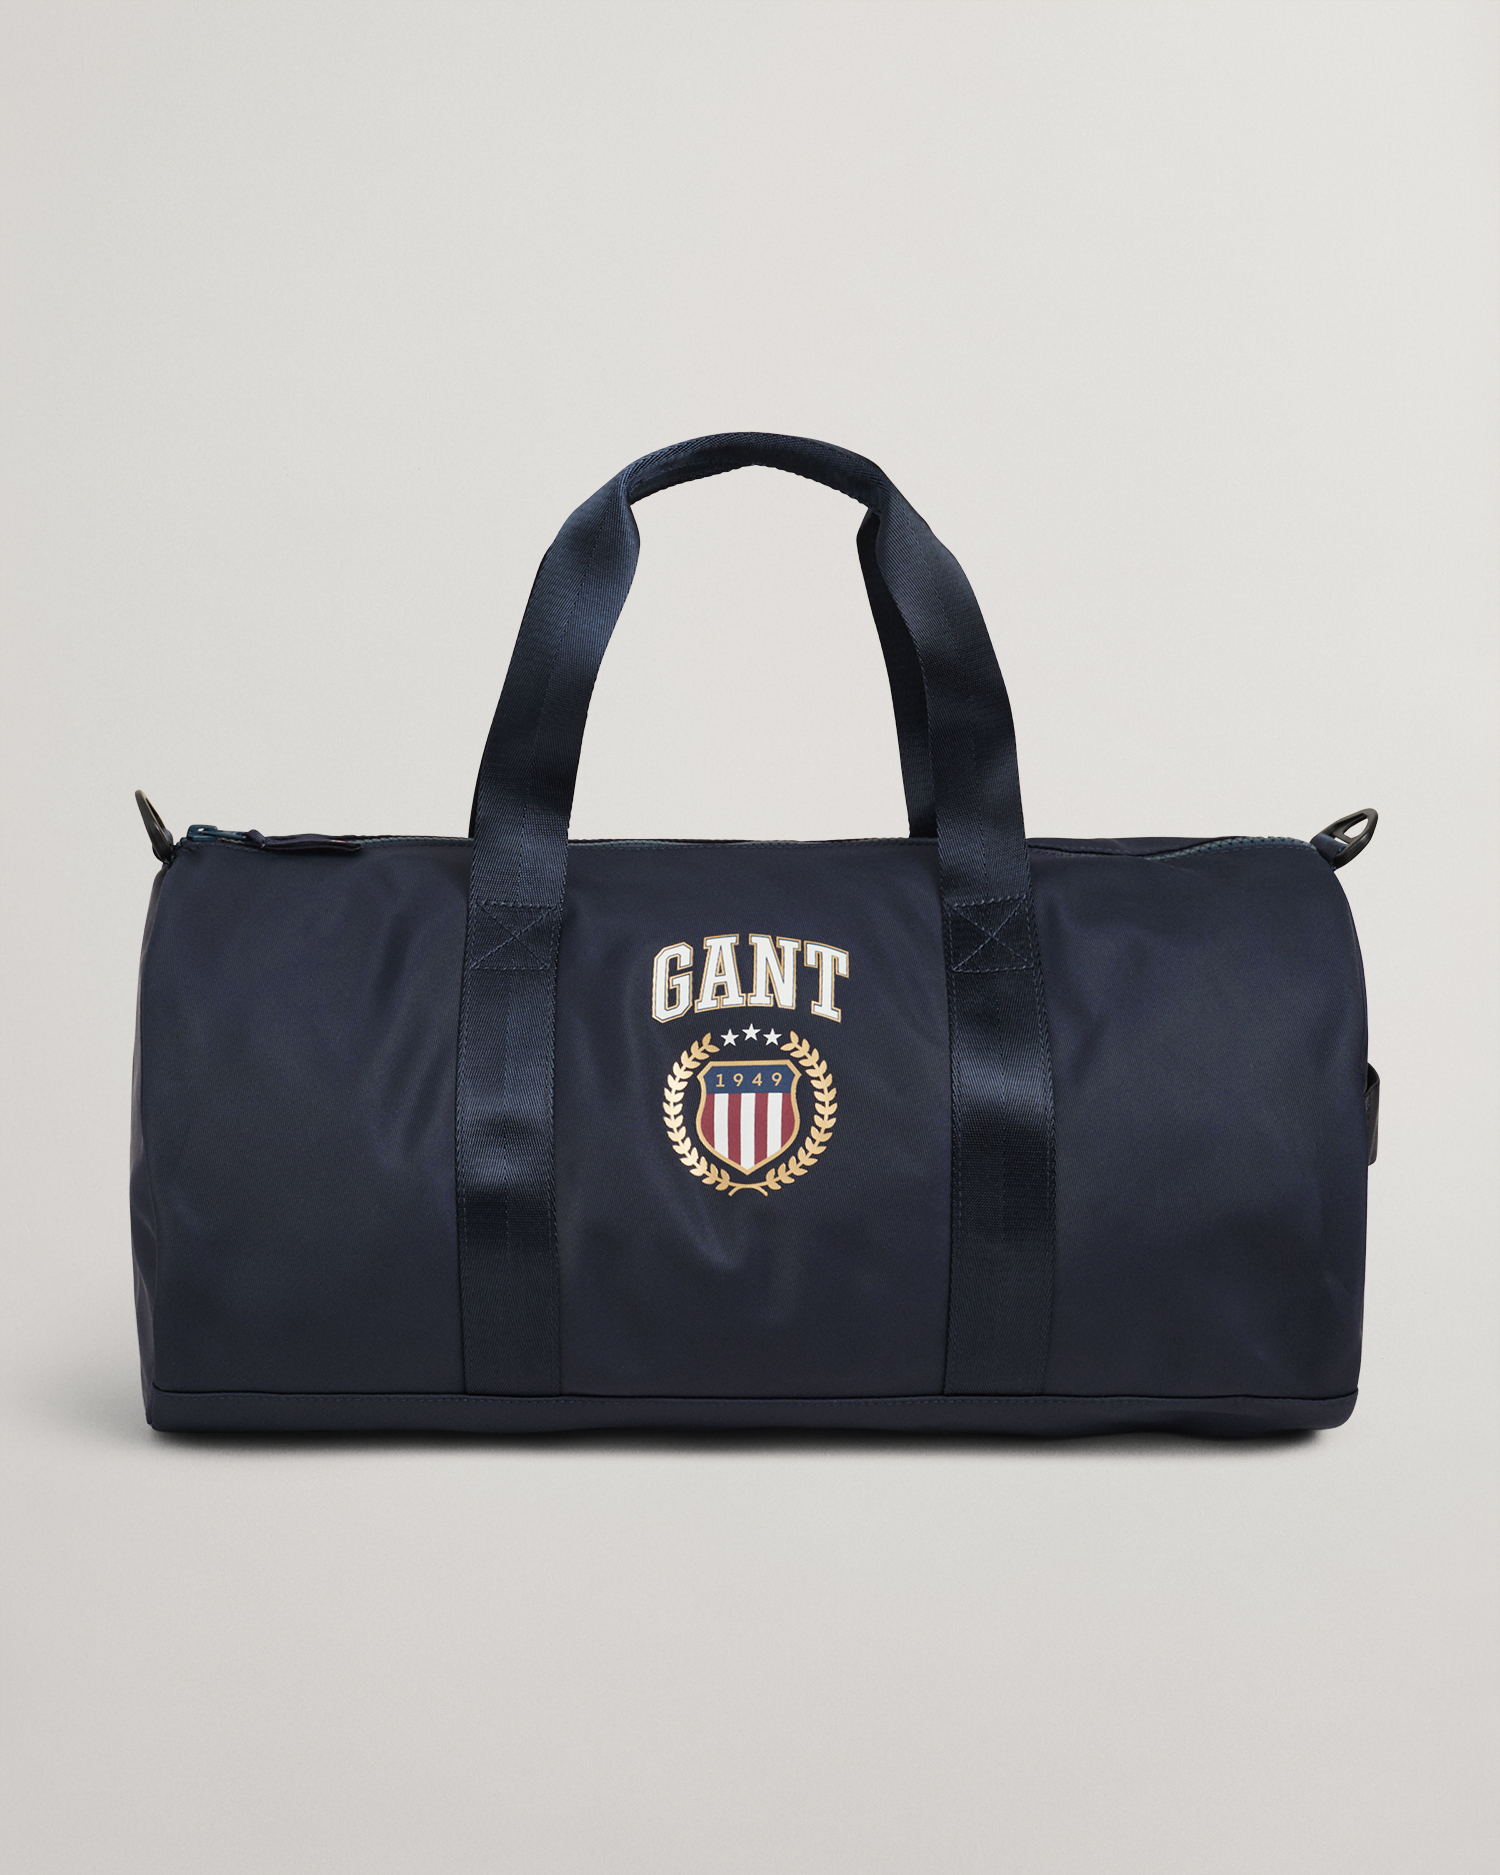 Mens Bags Gym bags and sports bags GANT Cotton Archive Shield Duffle Bag in Blue for Men 